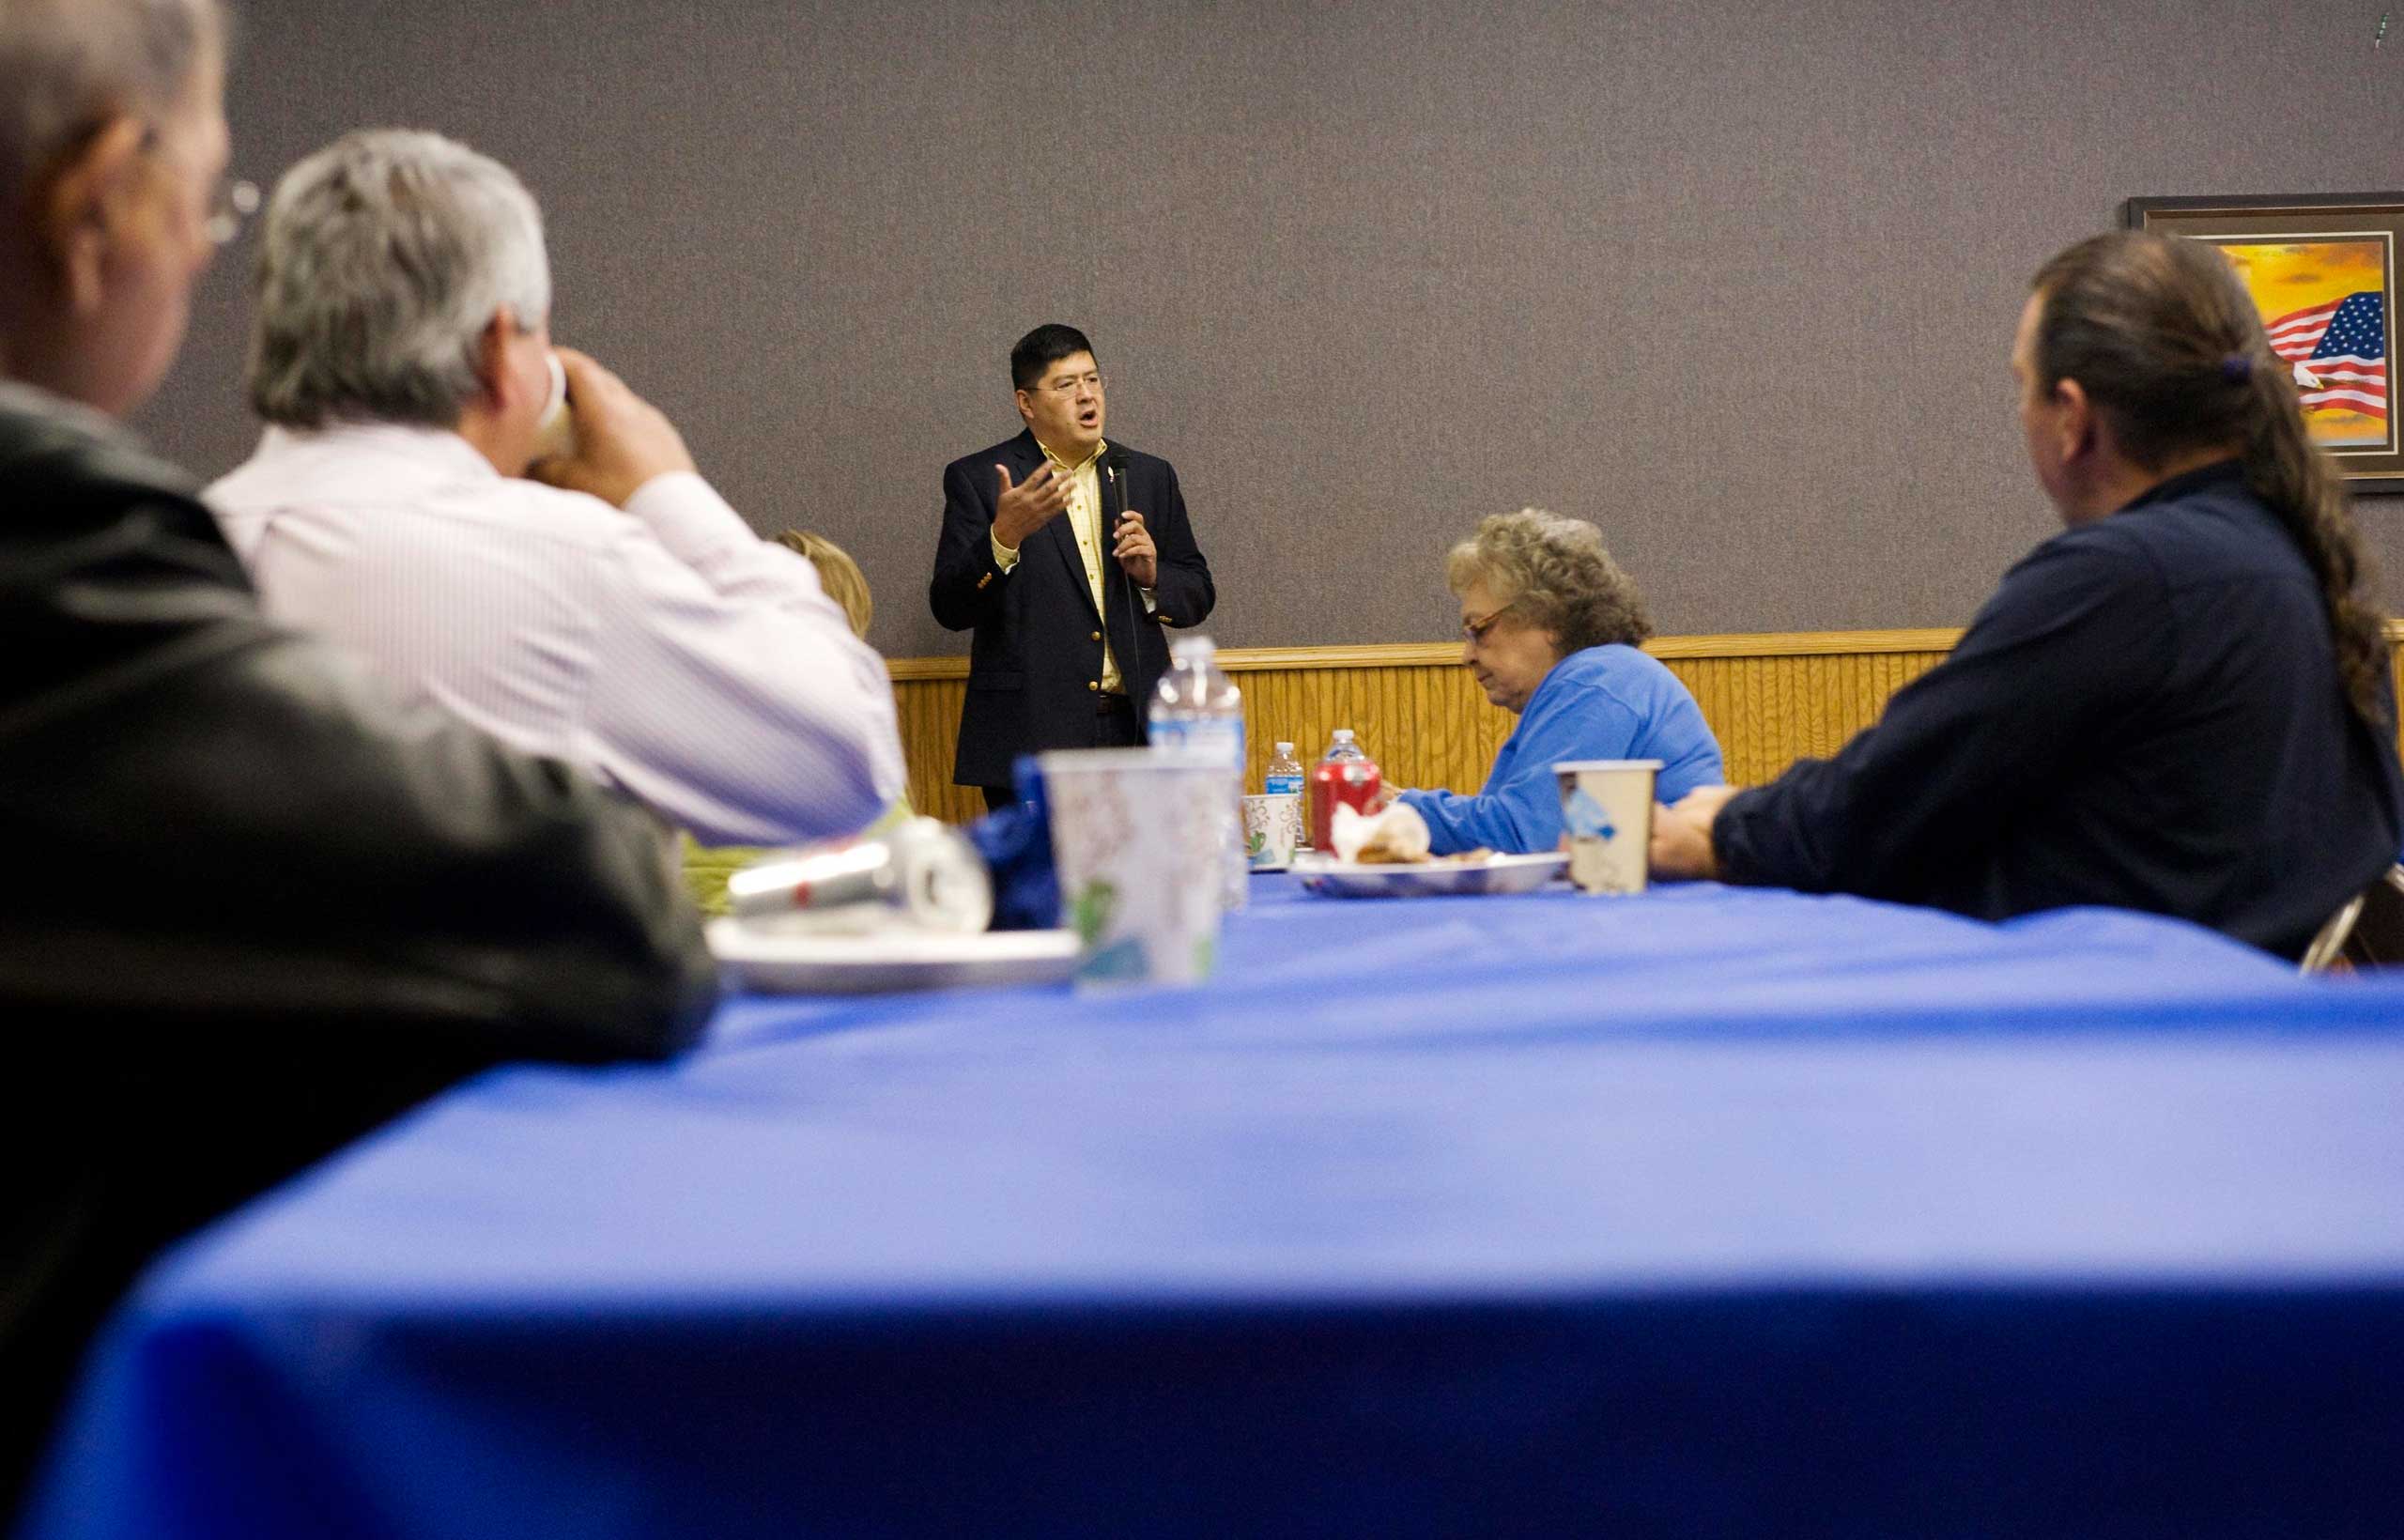 Three Affiliated Tribes council chairman candidate Damon Williams (C), speaks to supporters during a campaign dinner on the Fort Berthold Reservation in N.D. on Nov. 1, 2014.